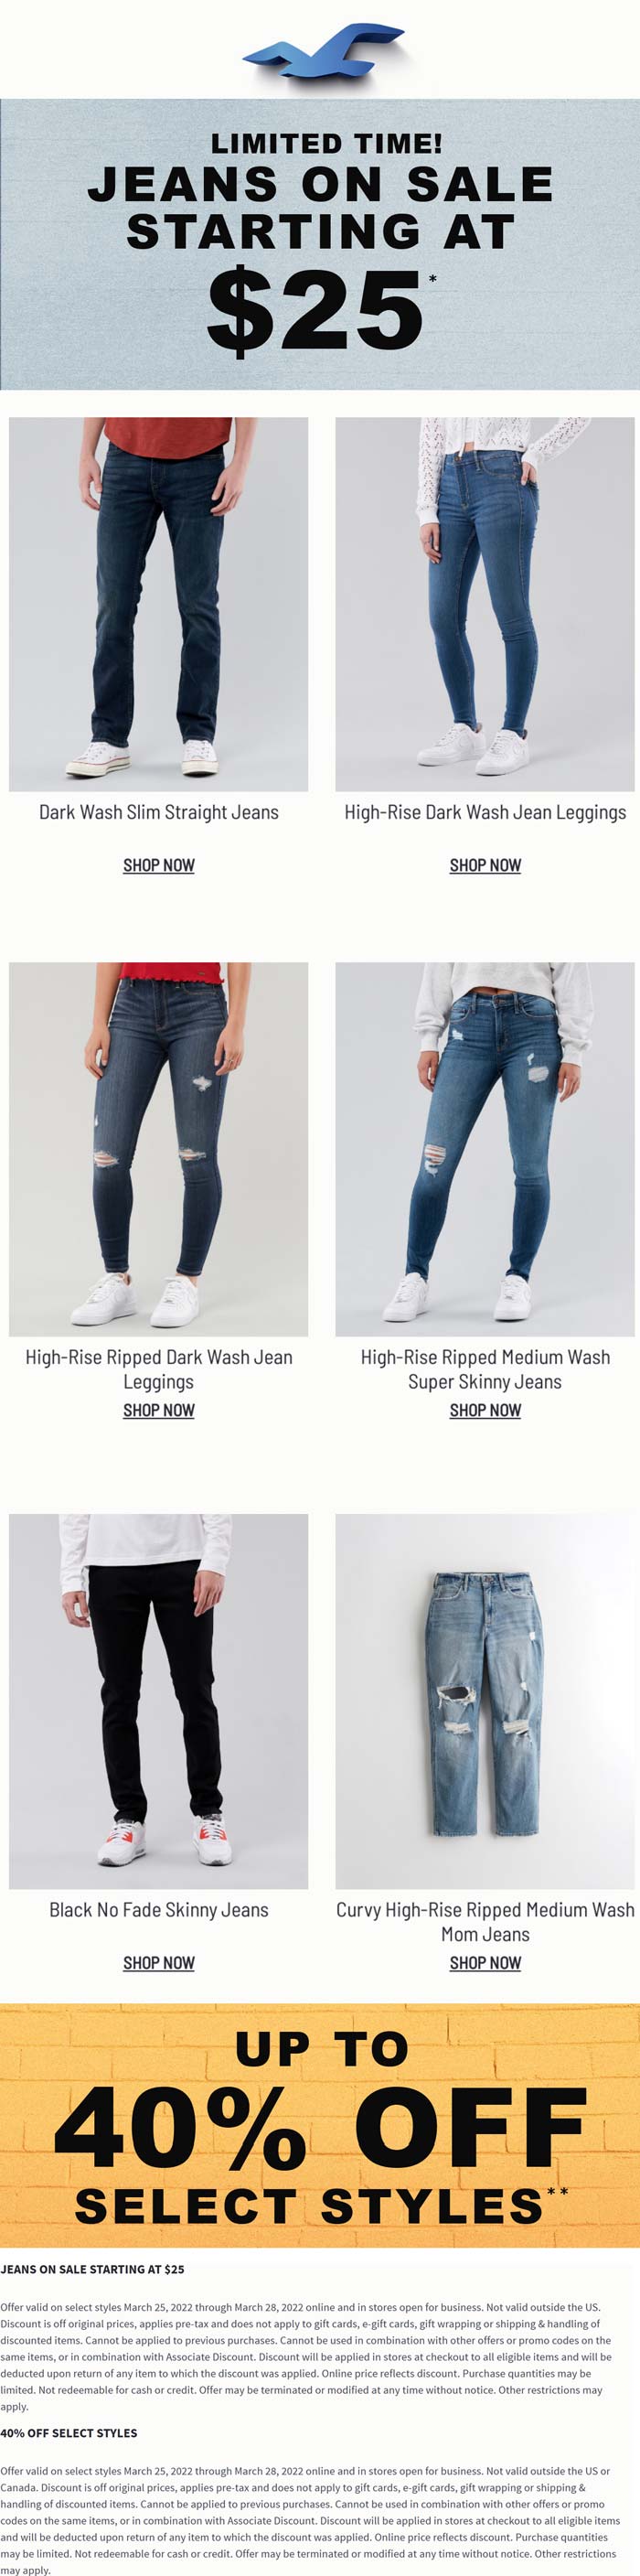 Hollister stores Coupon  Various $25 jeans at Hollister, ditto online #hollister 